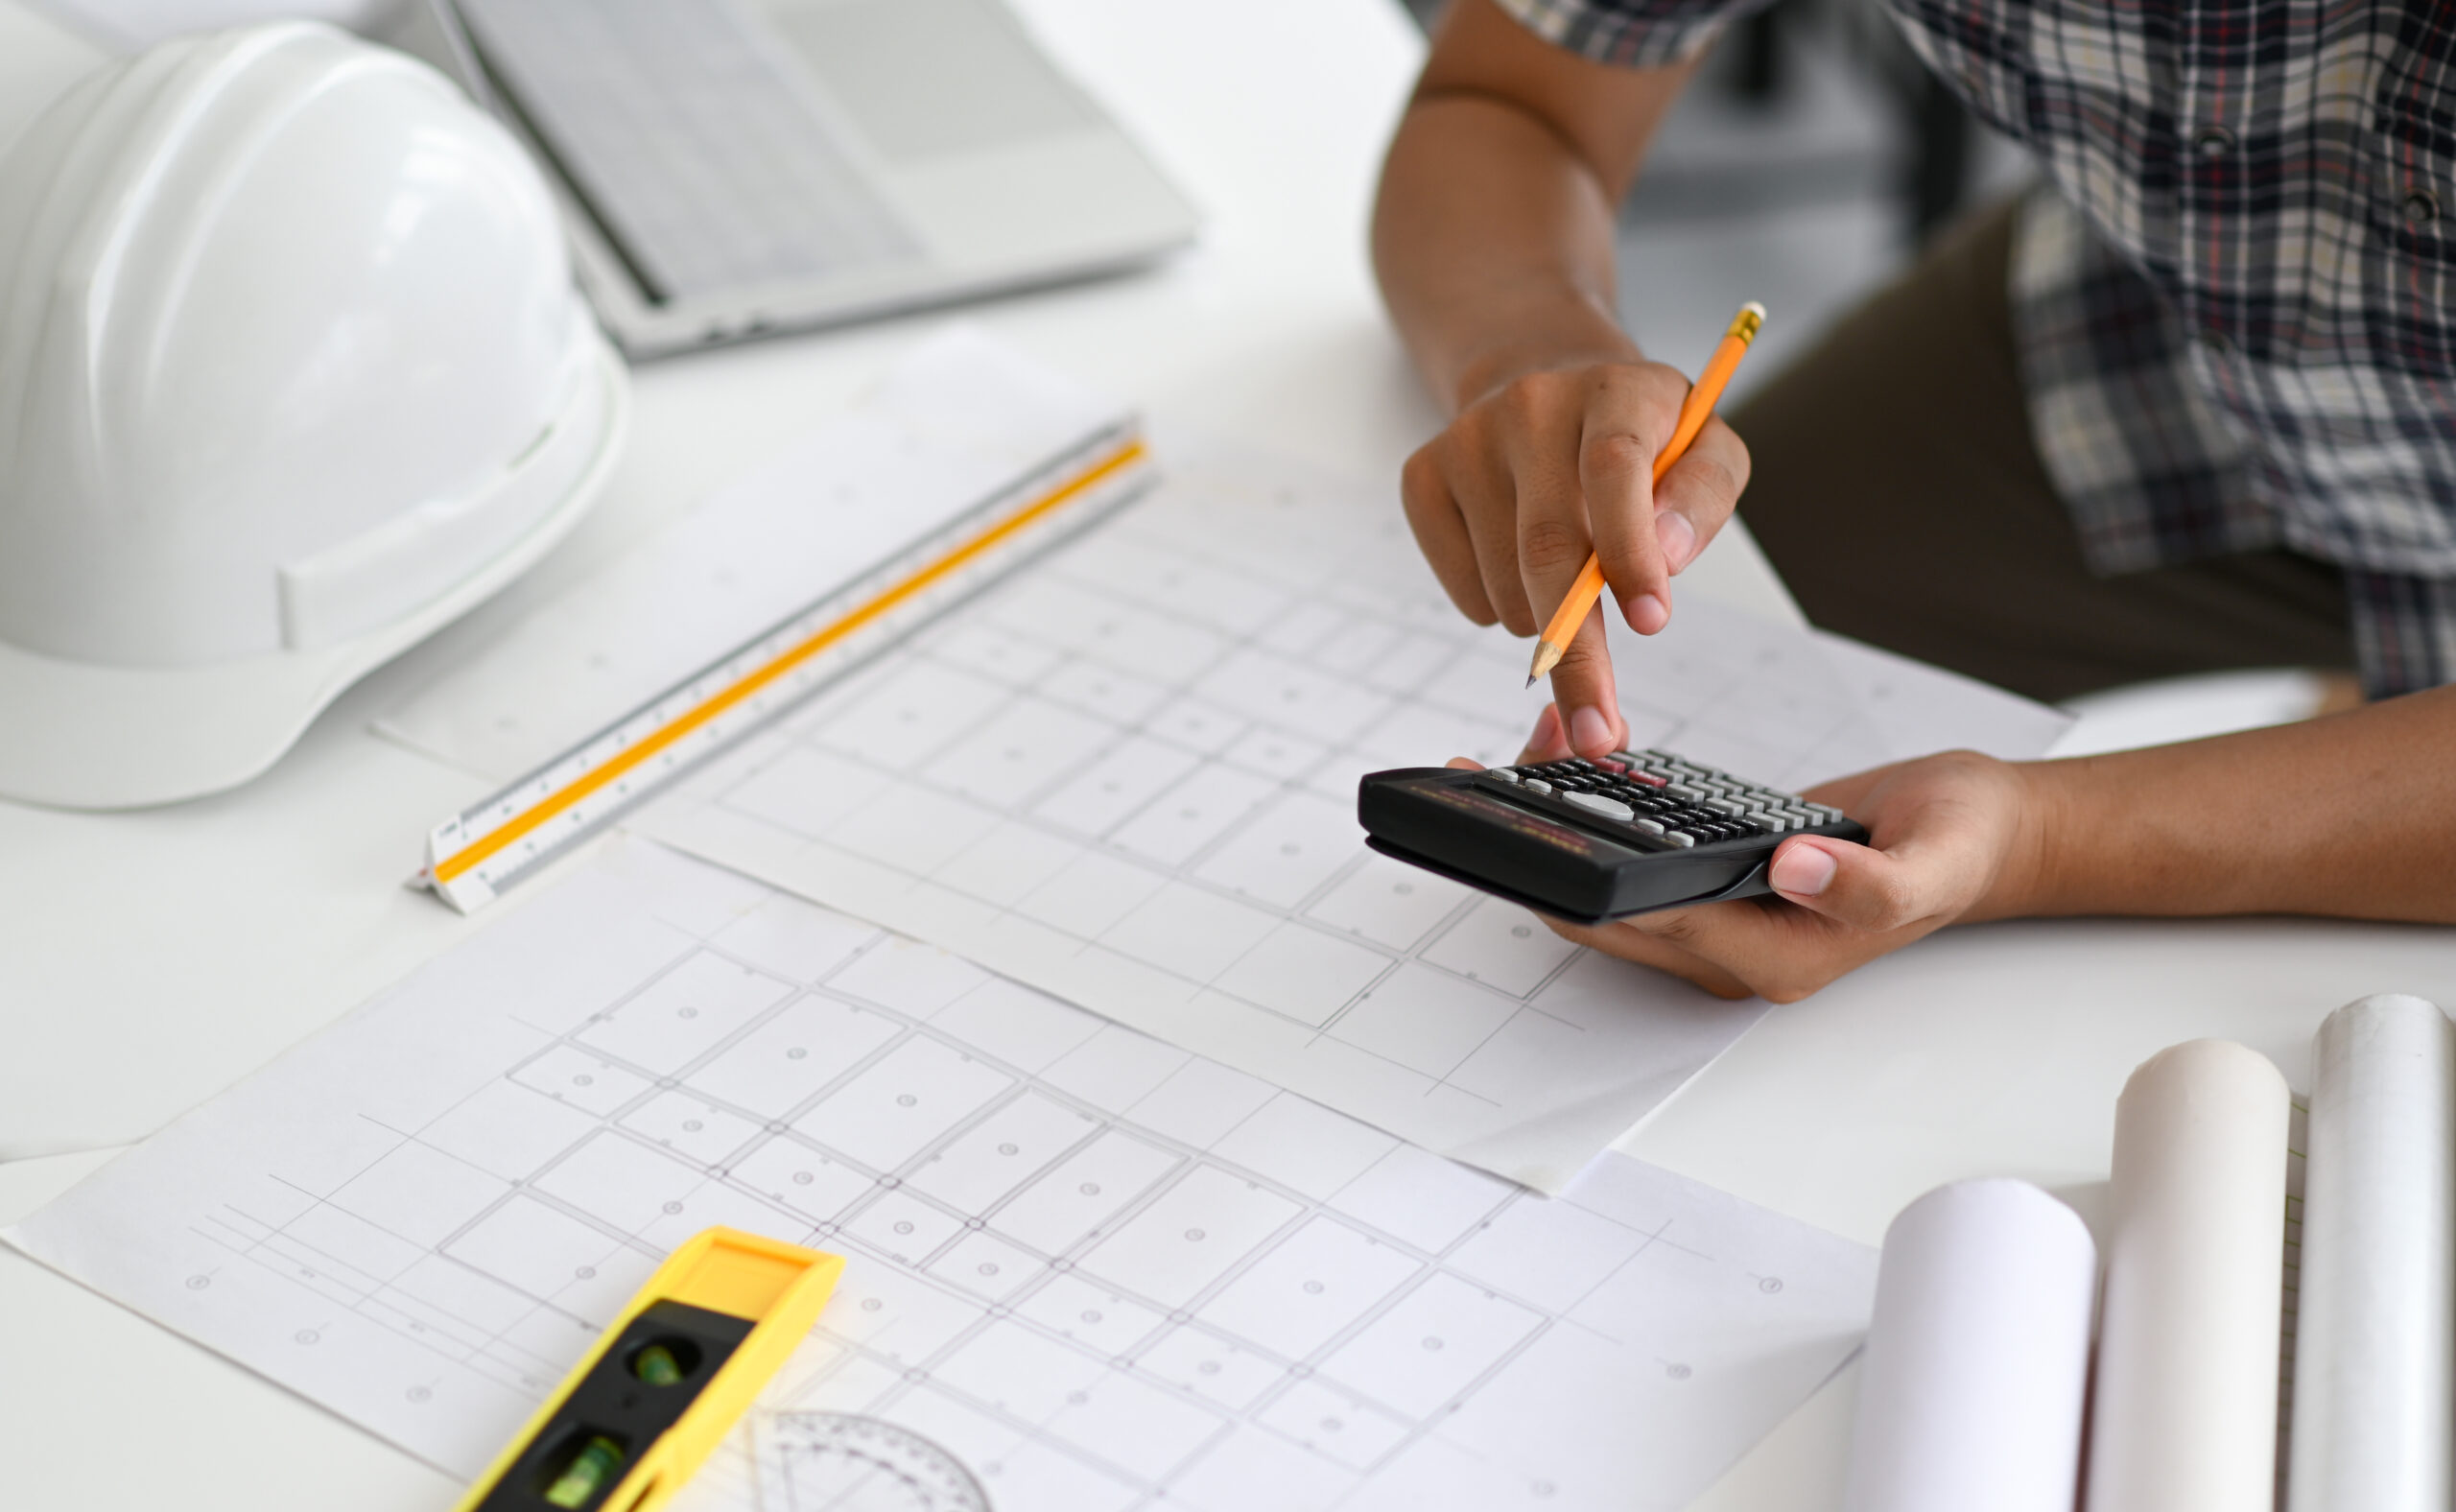 Architects are using a calculator to estimate the cost of house plans, house plans, safety helmet and office equipment placed on the desk.